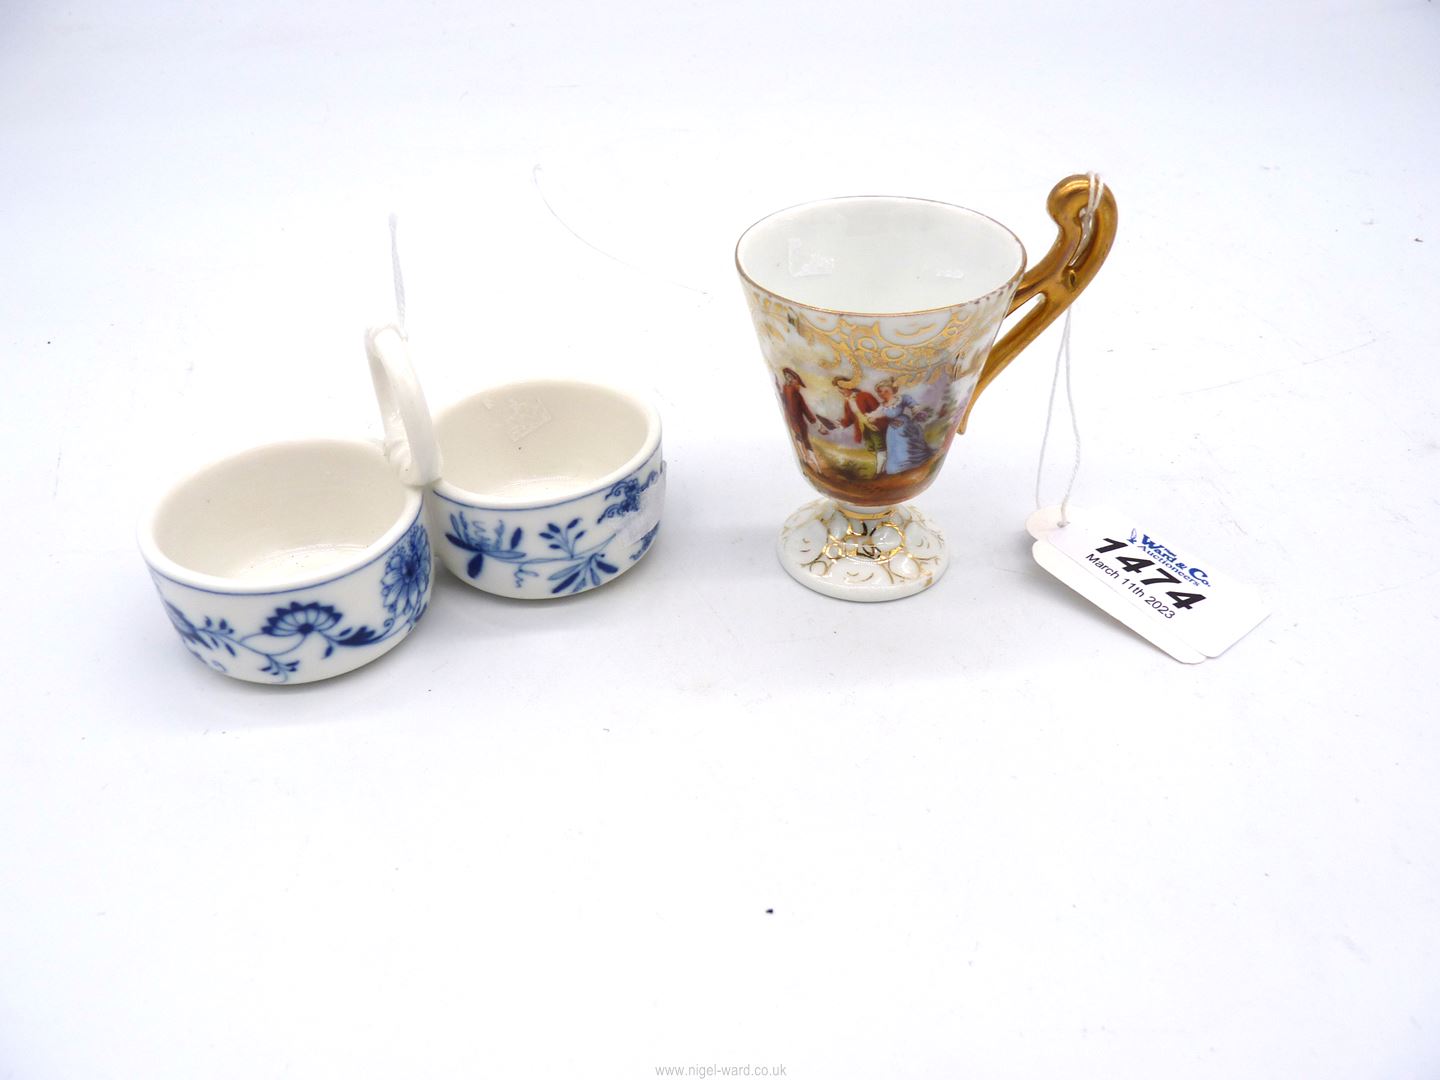 A pretty Meissen blue and white floral salt and pepper pots plus a continental miniature cup with